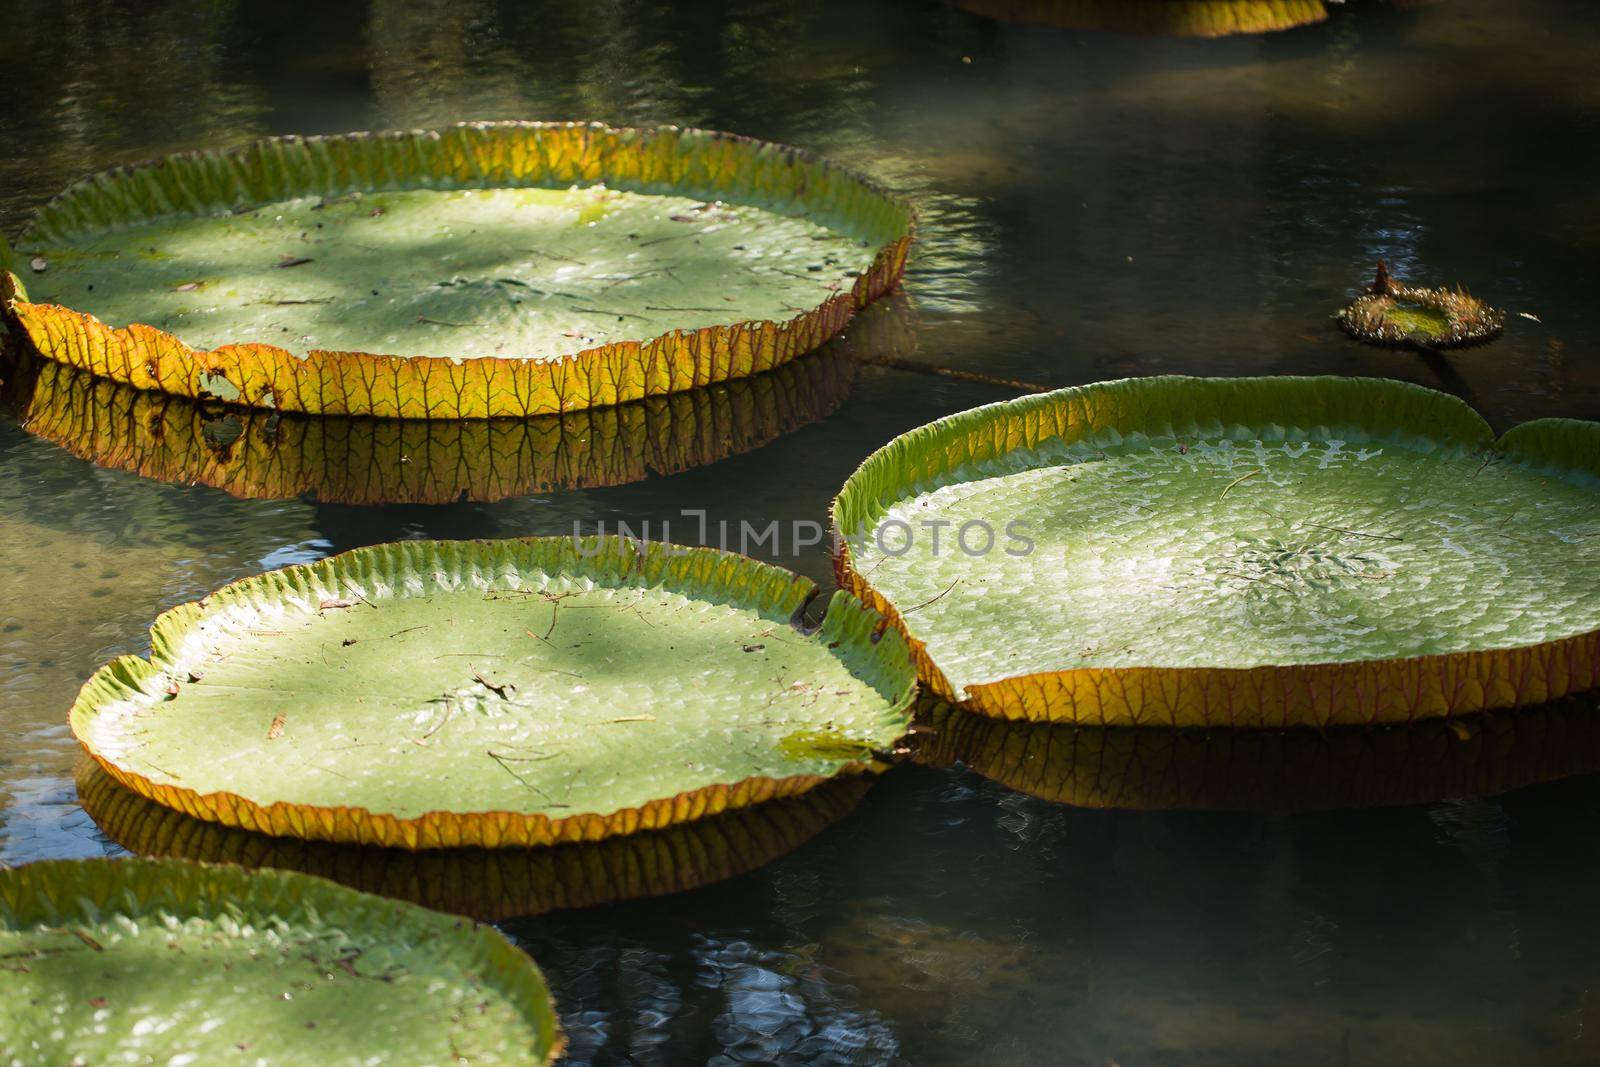 Giant, amazonian lily in water at the Pamplemousess botanical Gardens in Mauritius. Victoria amazonica, Victoria regia. by StudioPeace